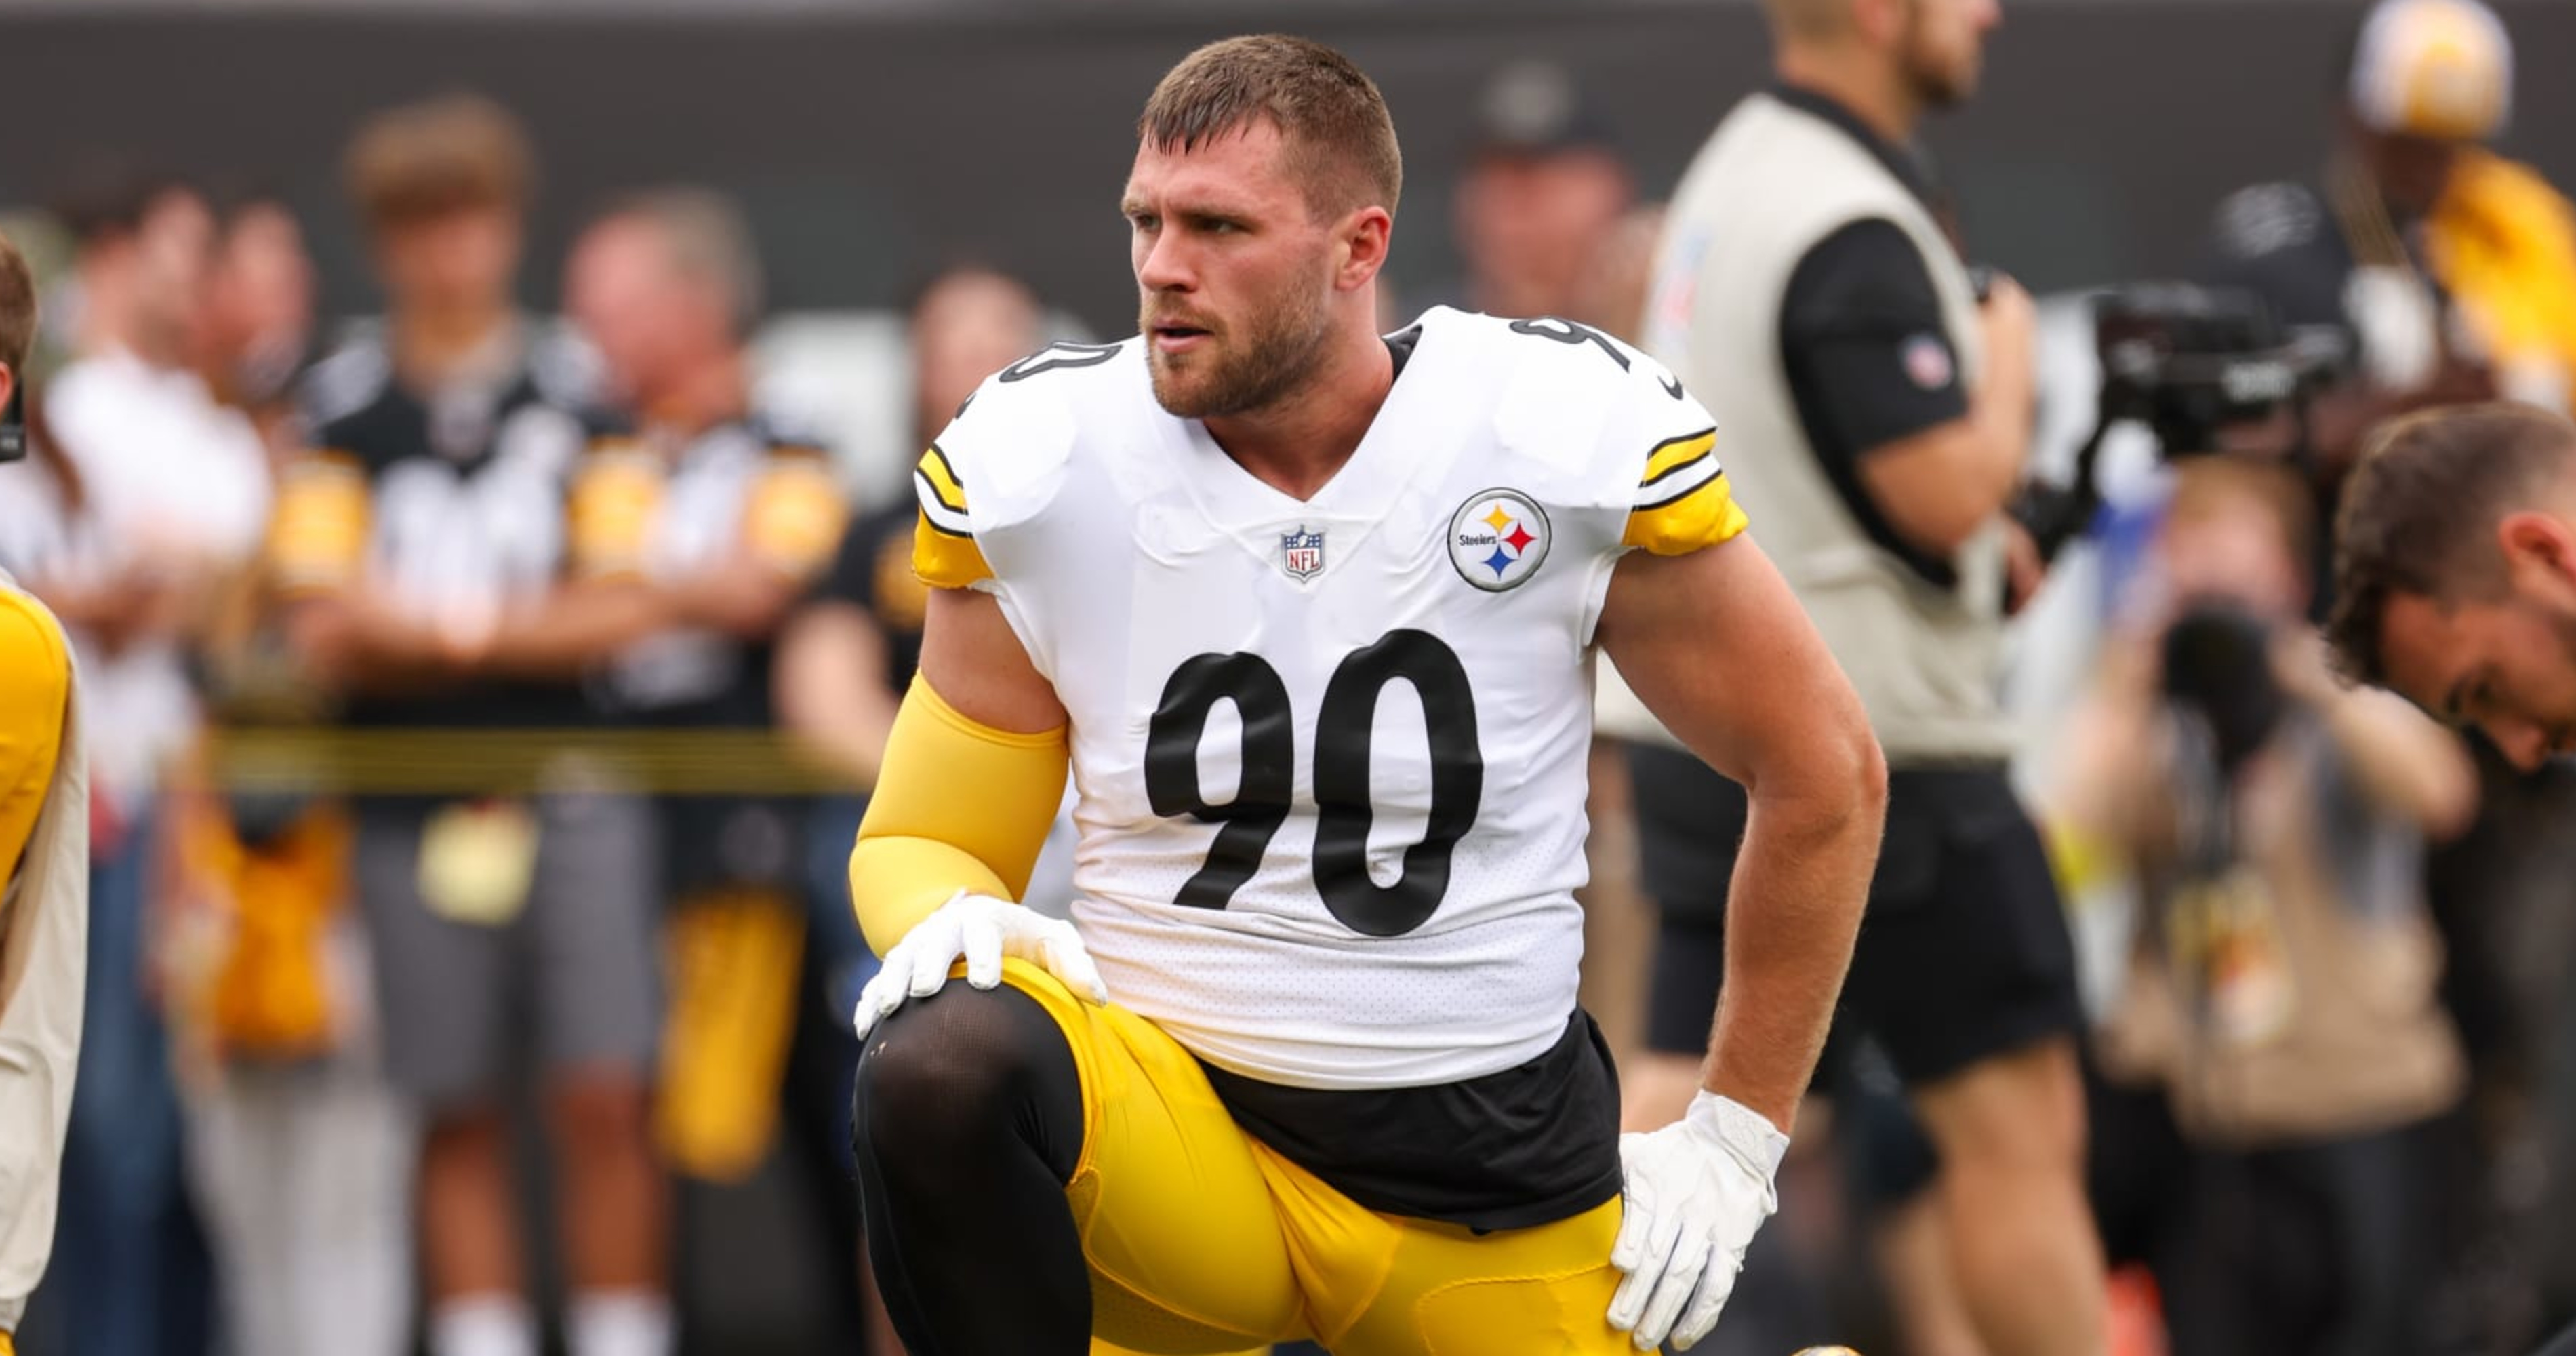 Steelers' T.J. Watt Placed on IR After Suffering Pec Injury, Likely Out